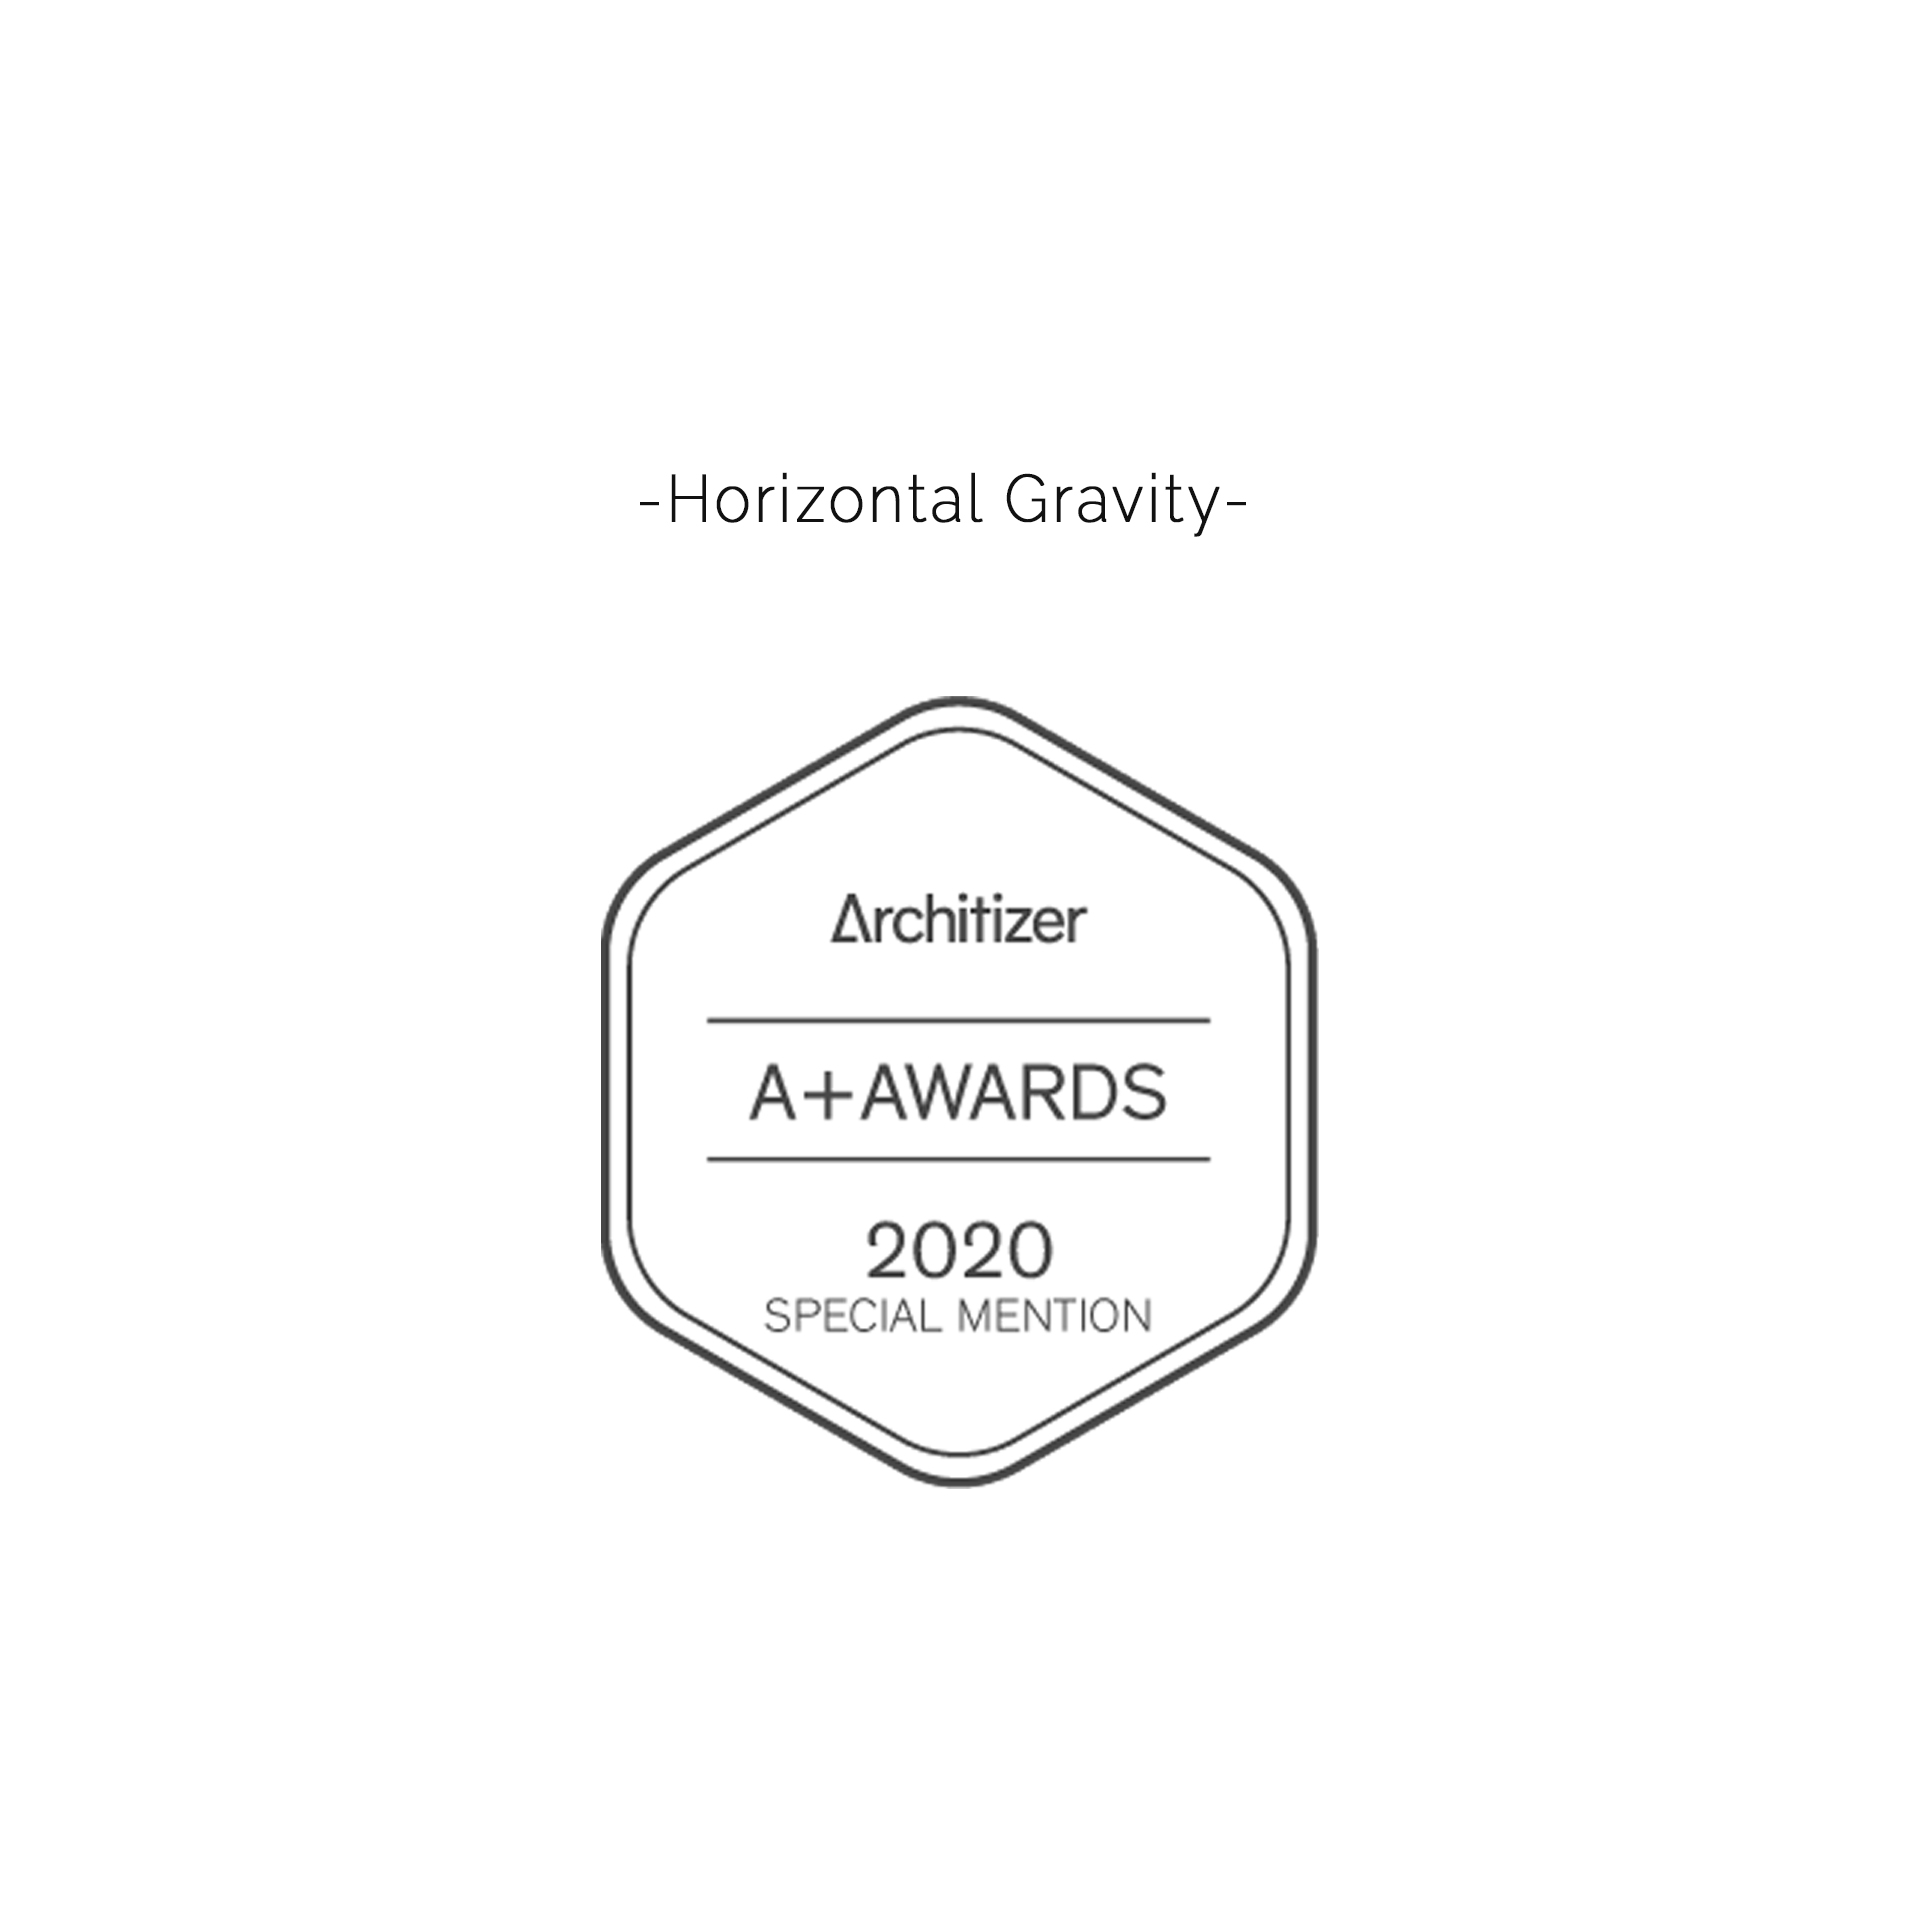 "Horizontal Gravity" receives special mention in the 2020 Architizer A+ Awards